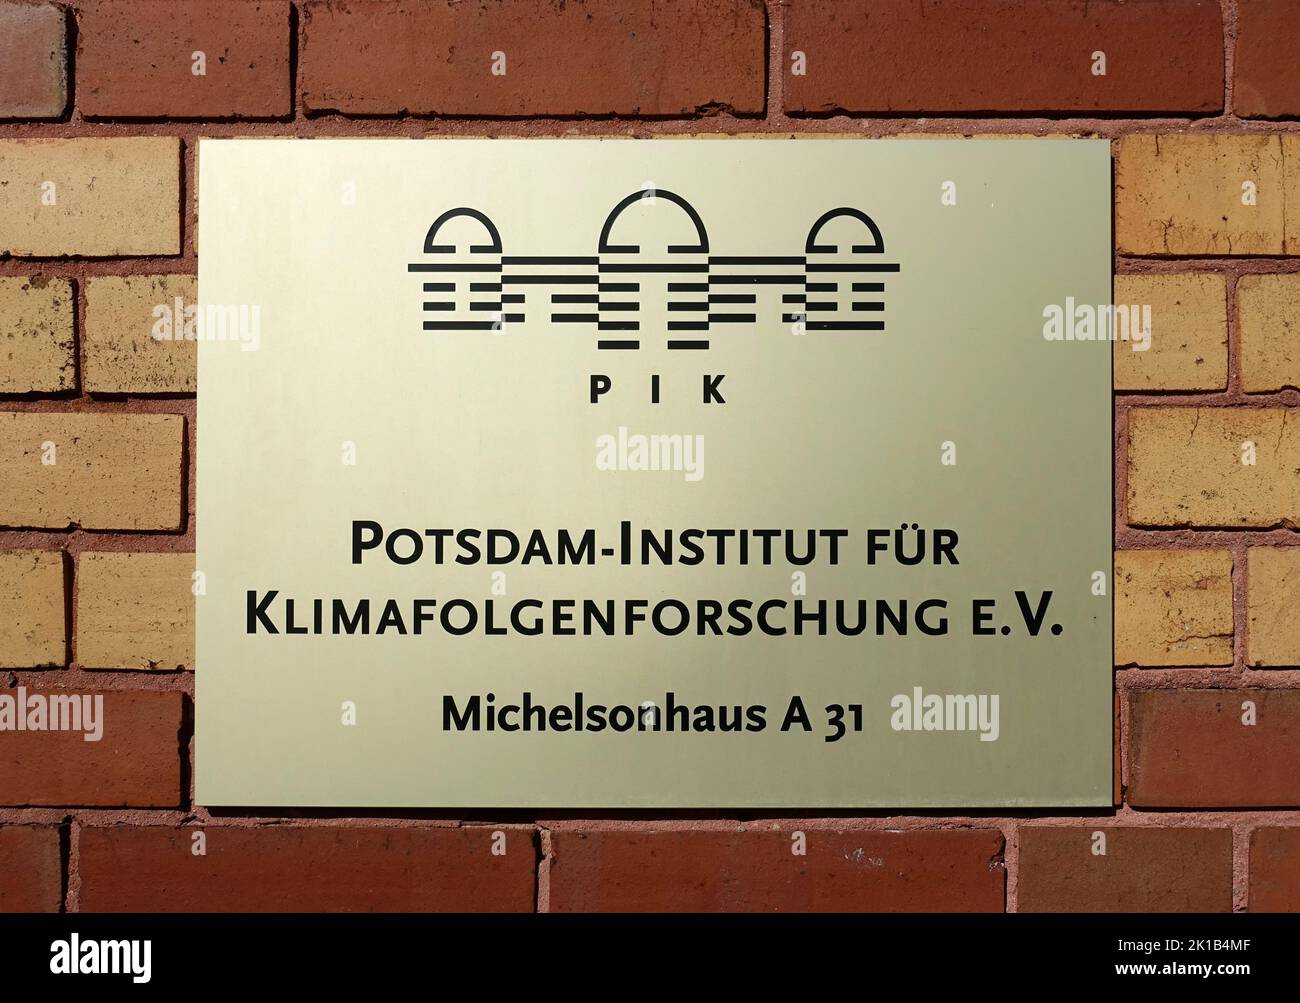 Potsdam Institute for Climate Impact Research, Potsdam, Germany Stock Photo